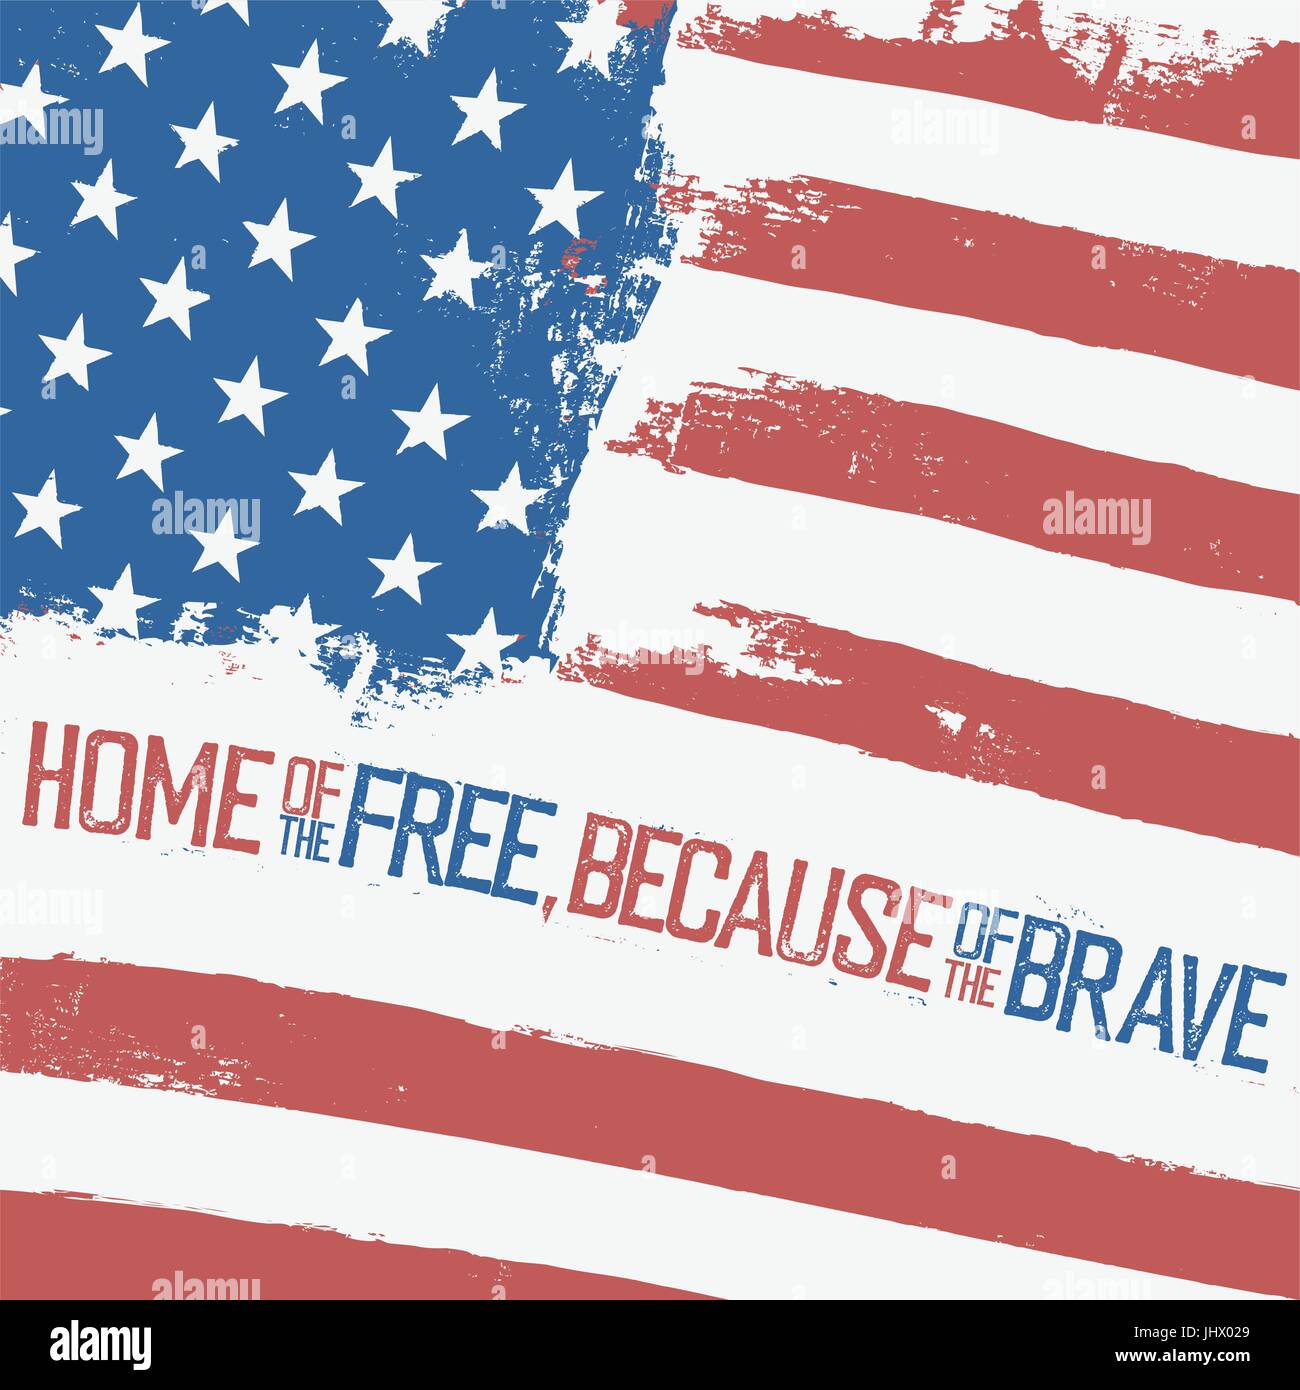 Home Of The Free Because Of The Brave American Flag With Weavy